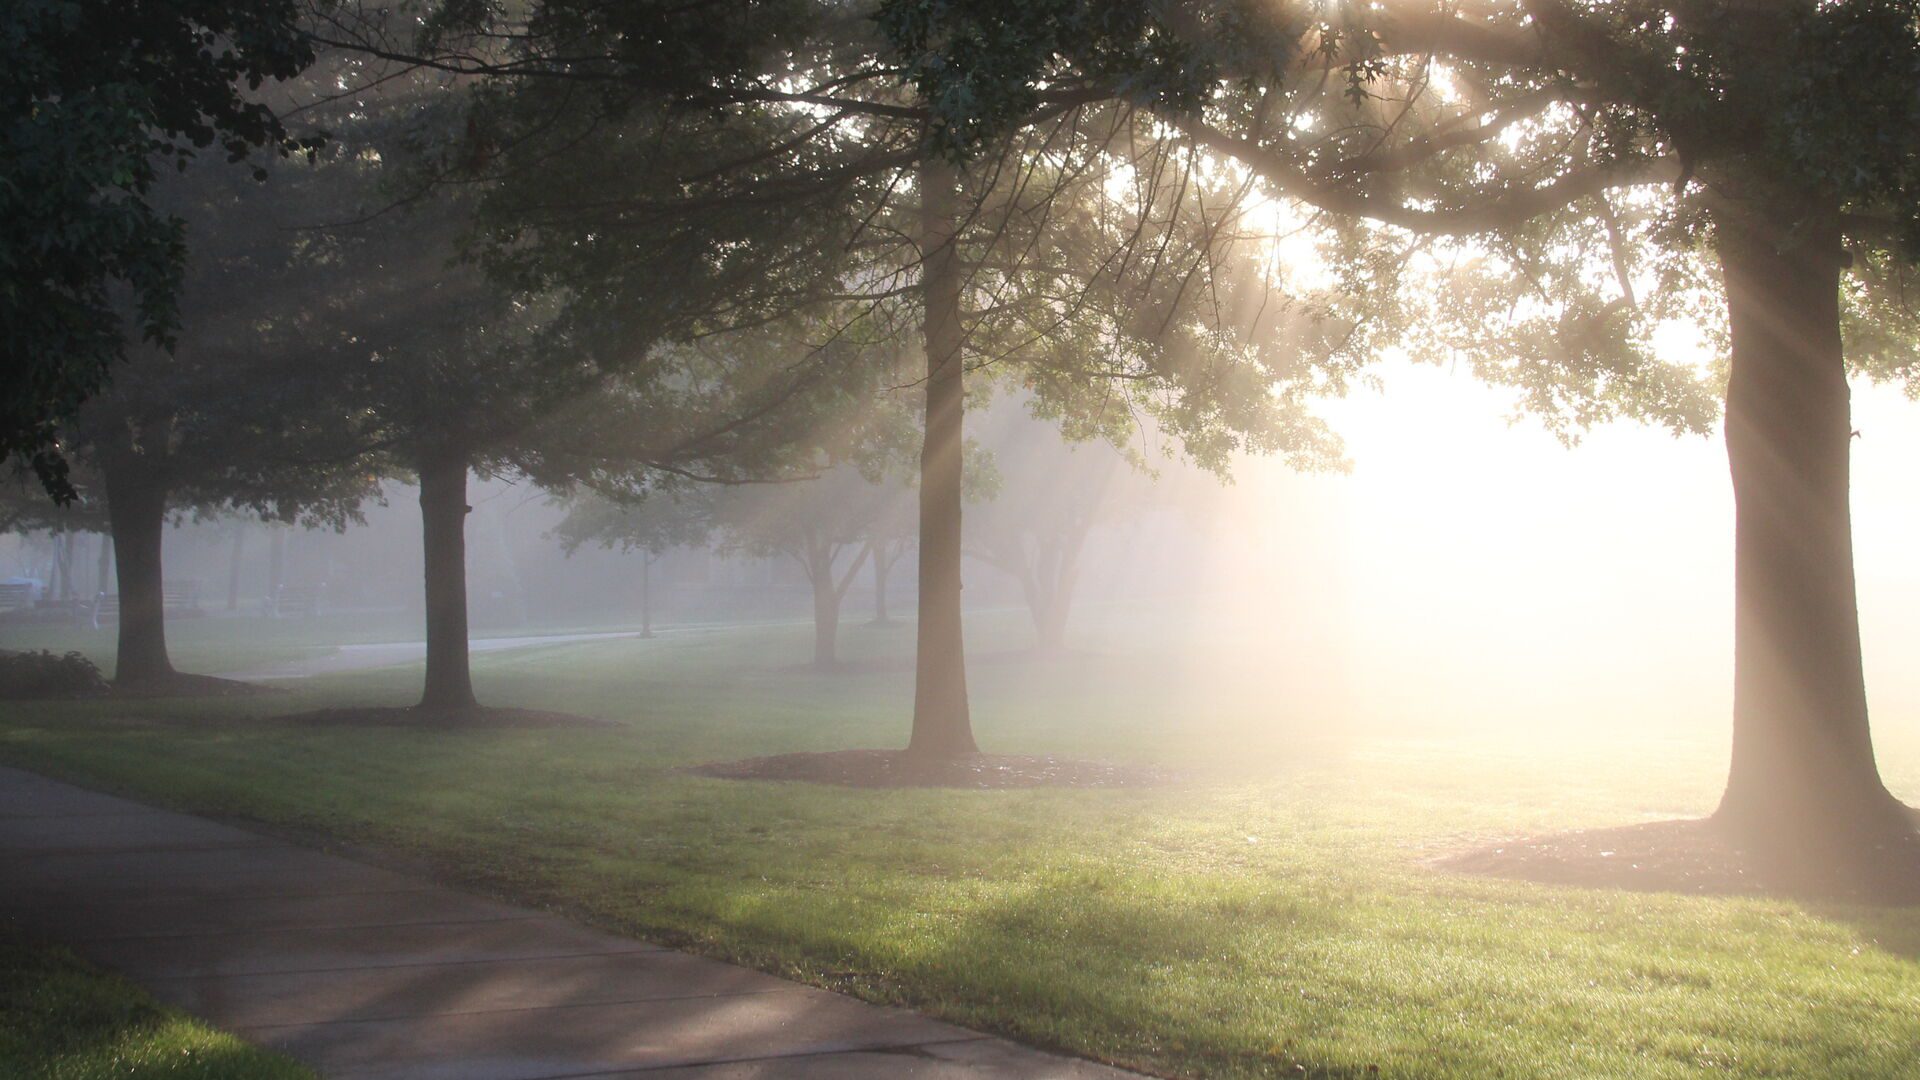 Sun streaming through the trees on campus on a foggy morning.